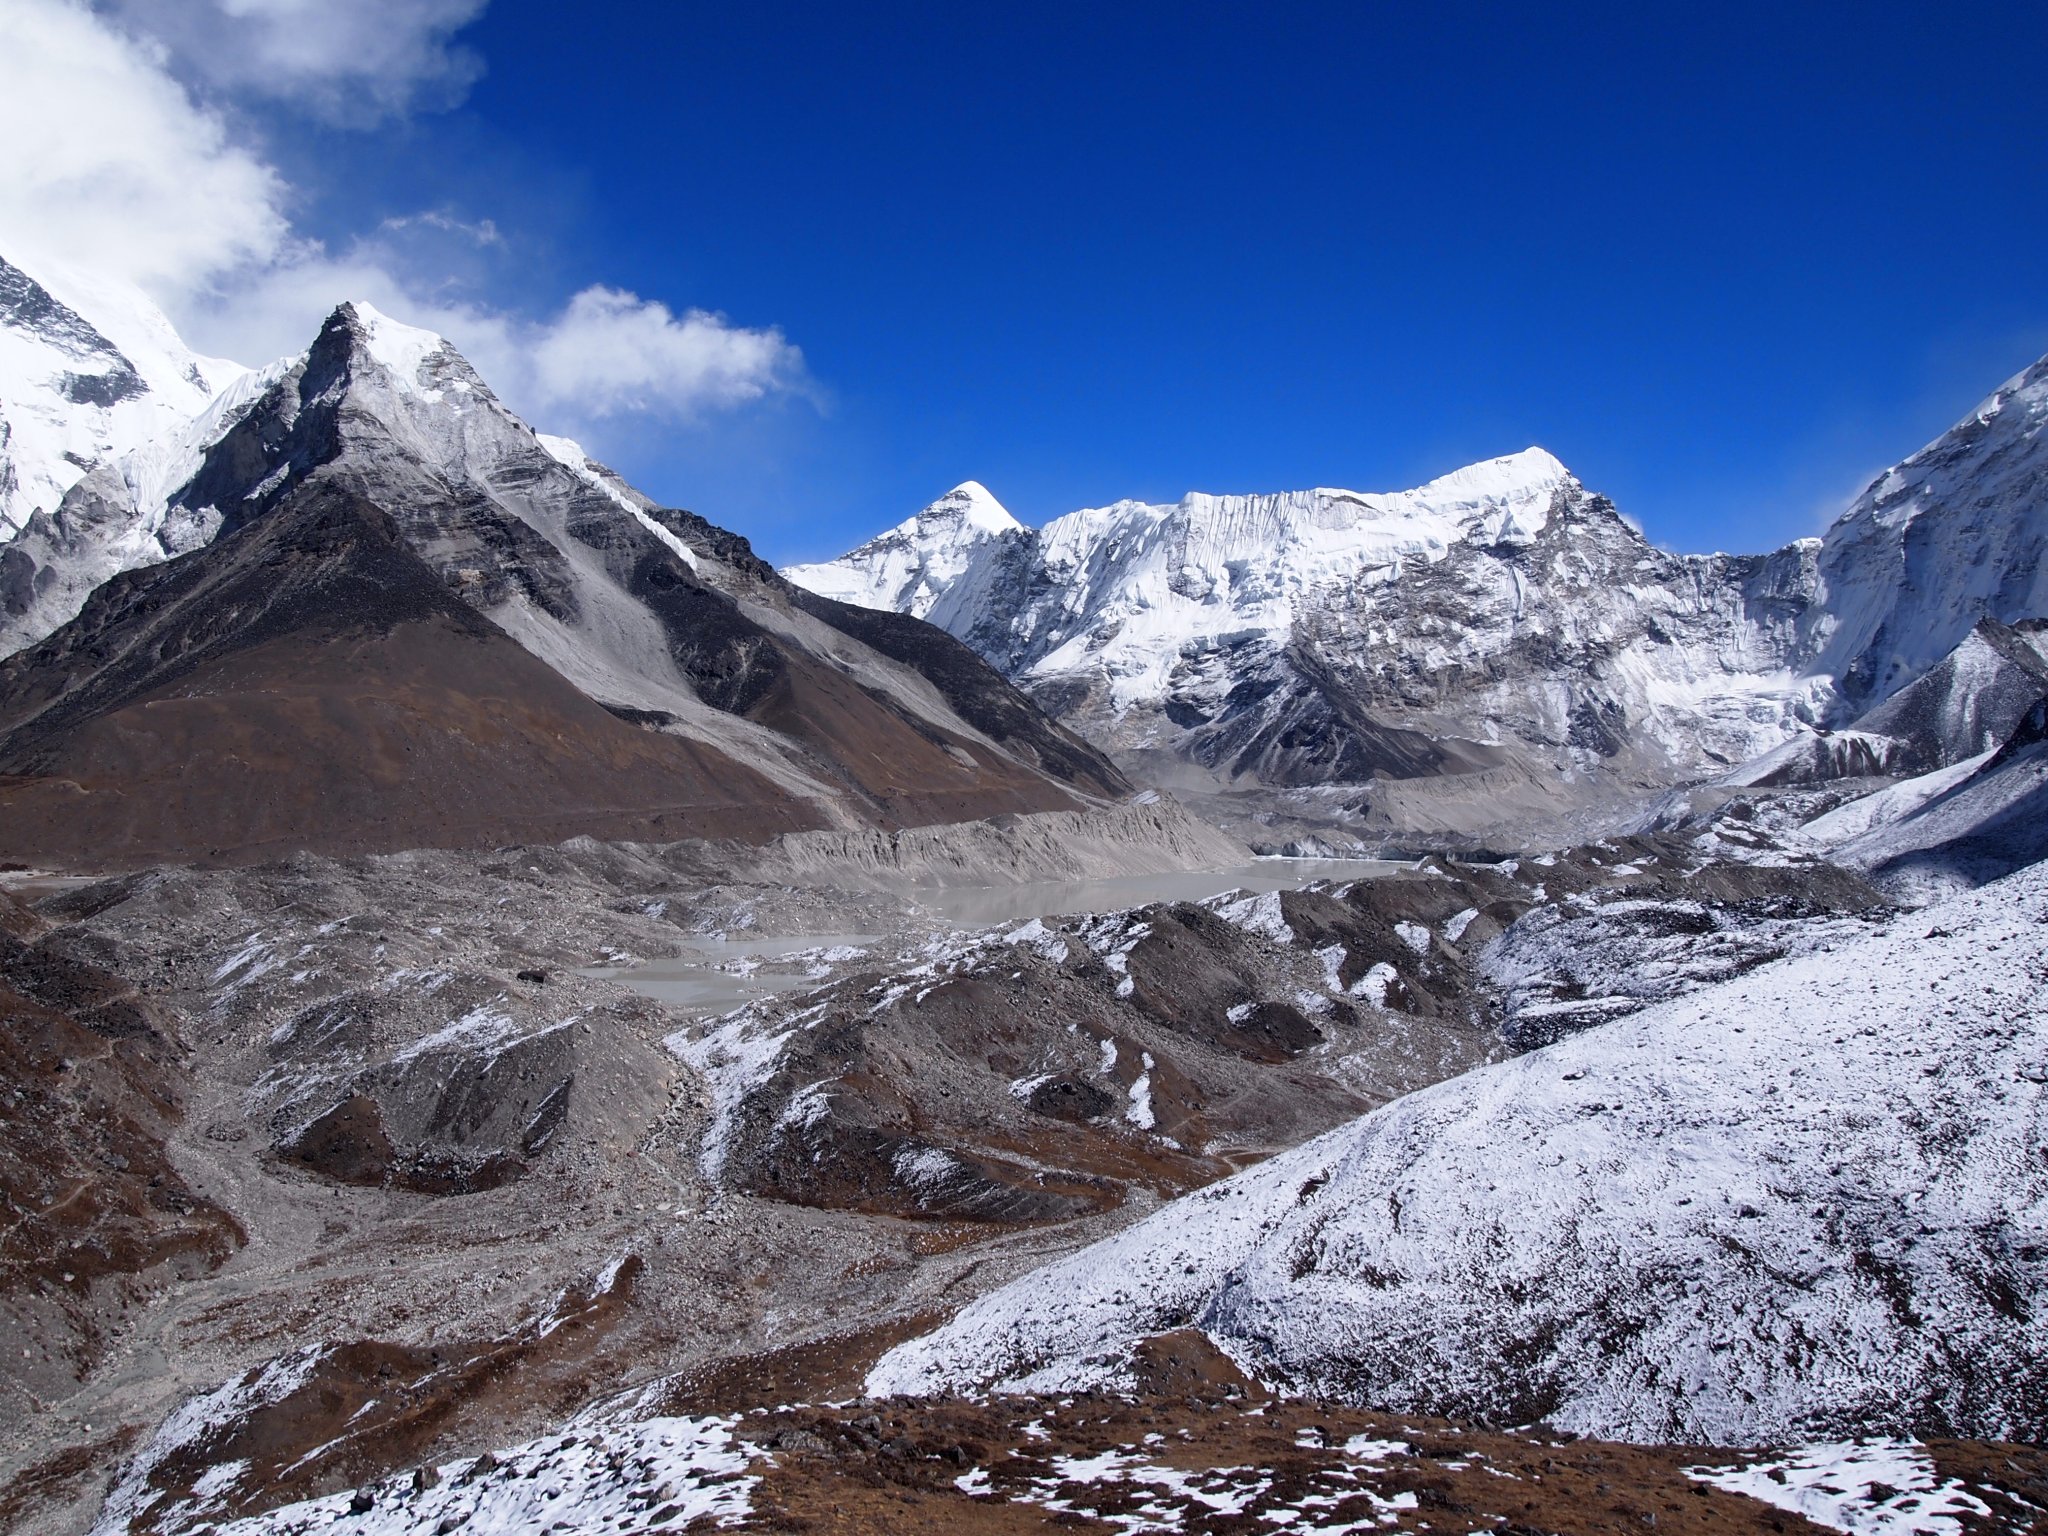 A photo of Imja Tsho, a lake made up of meltwater from Imja-Lhotse Shar Glacier in Eastern Nepal. One tall, sharp gray and brown mountain dominates the left side of the image, with gravelly lowlands partly covered with snow in the foreground. Peaks further back are covered with white snow. The sky is bright blue with a few puffy clouds above the largest mountain.